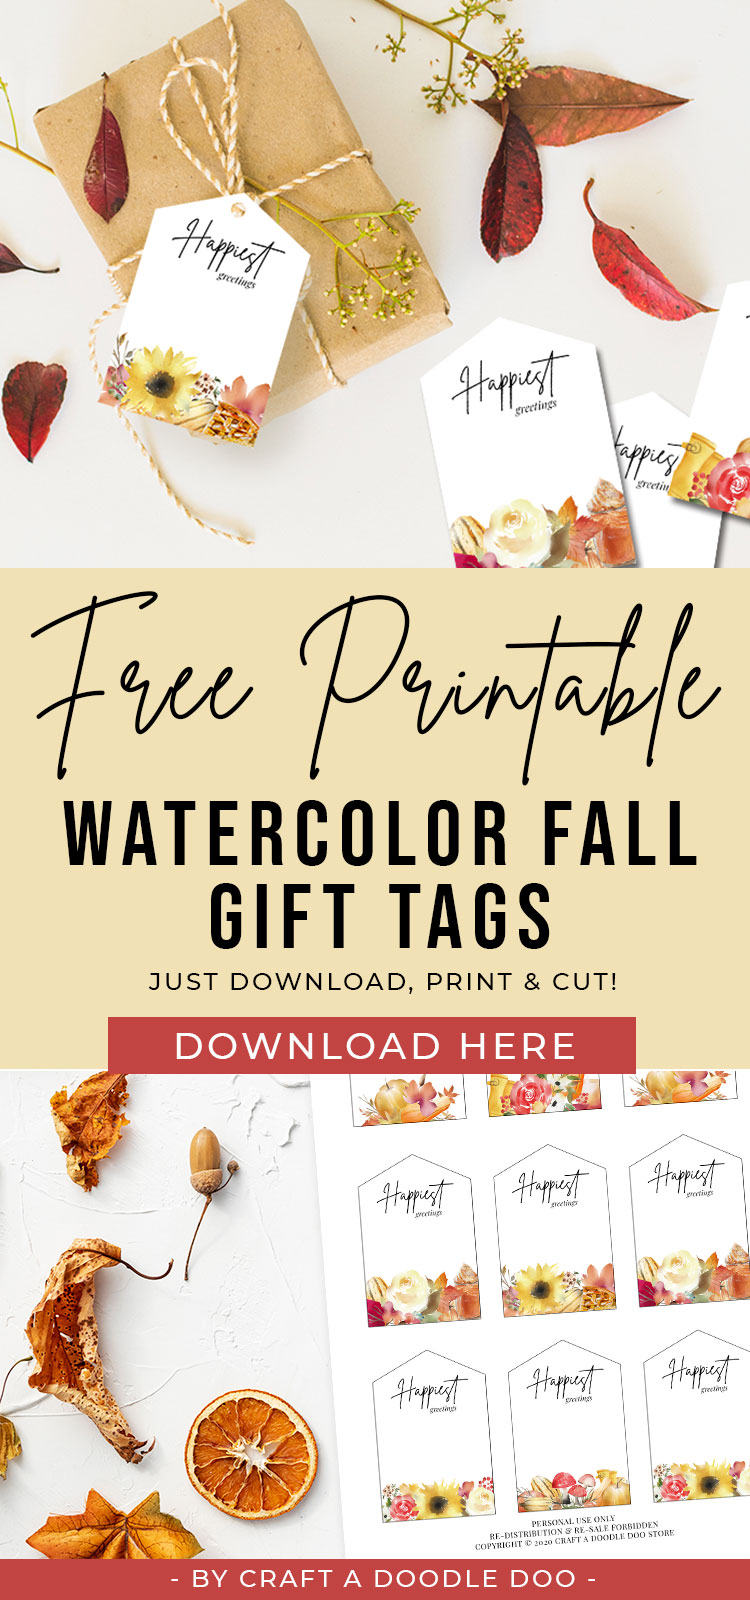 Craft A Doodle Doo: Free Printable Fall Gift Tags